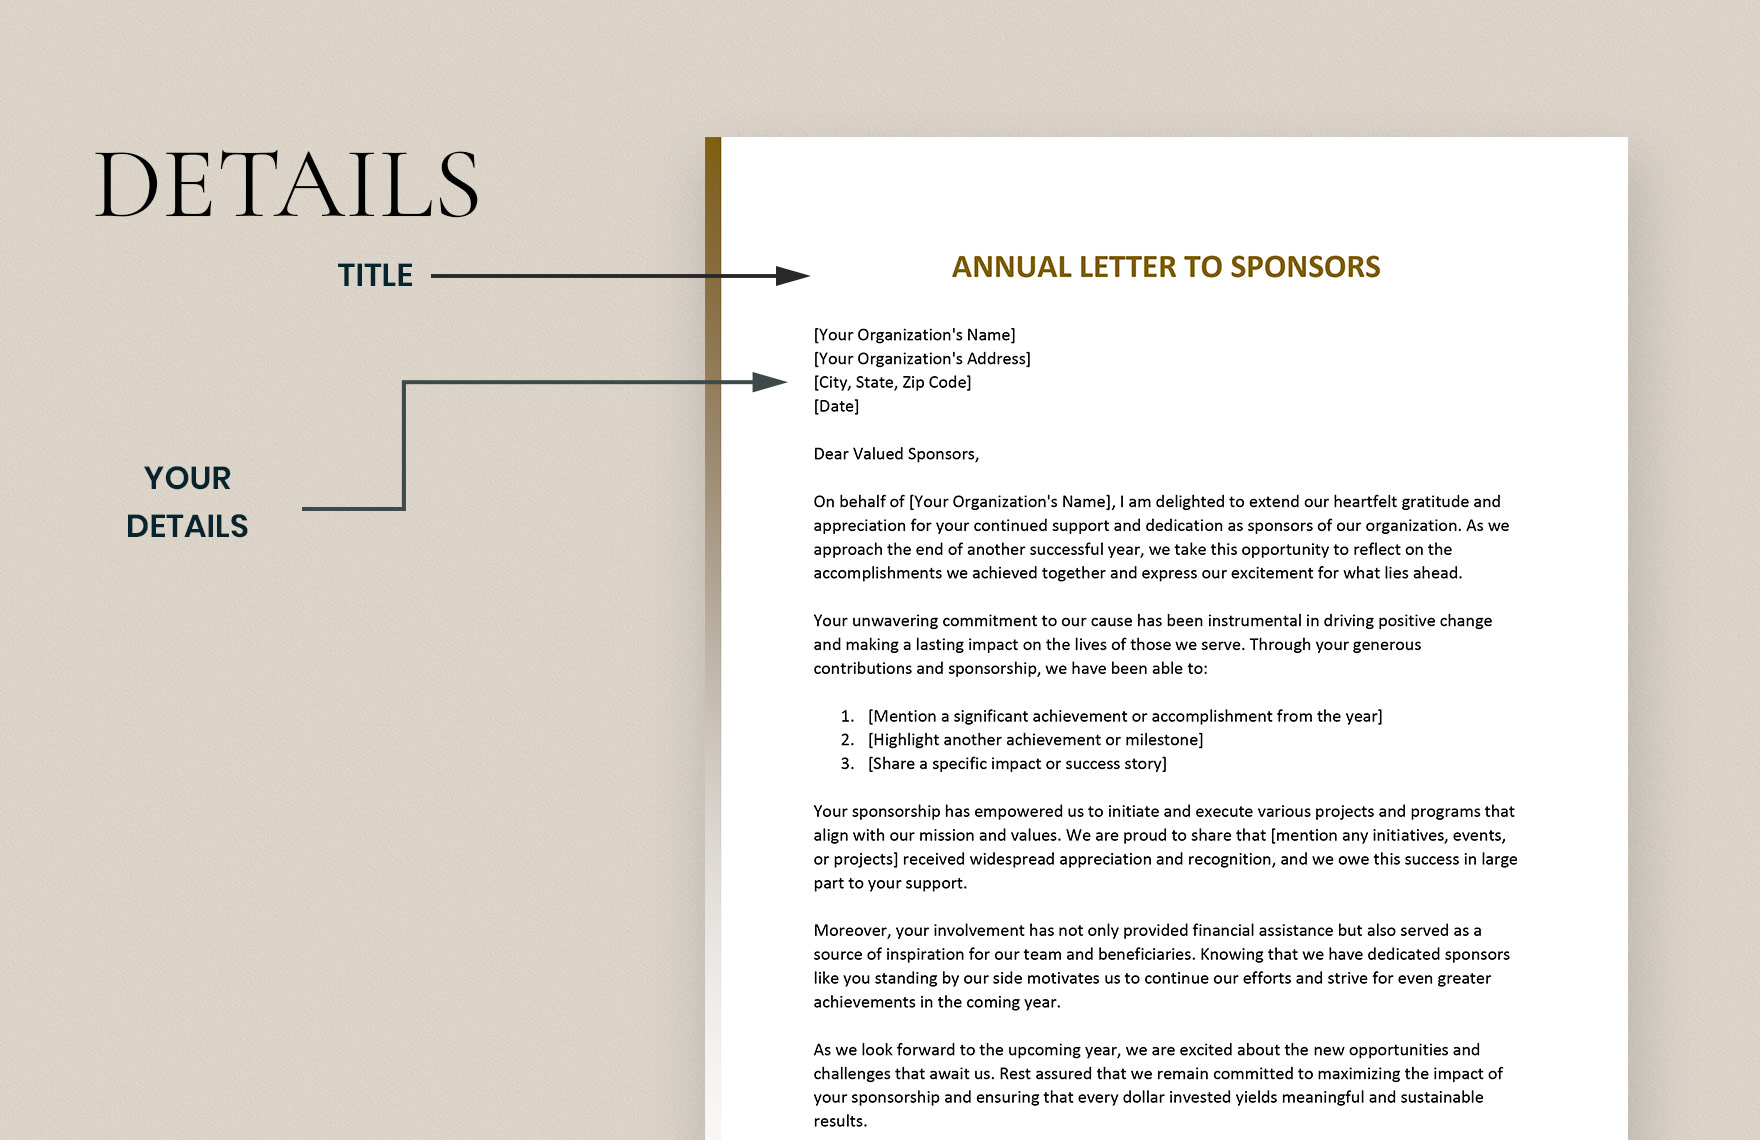 Annual Letter to Sponsors